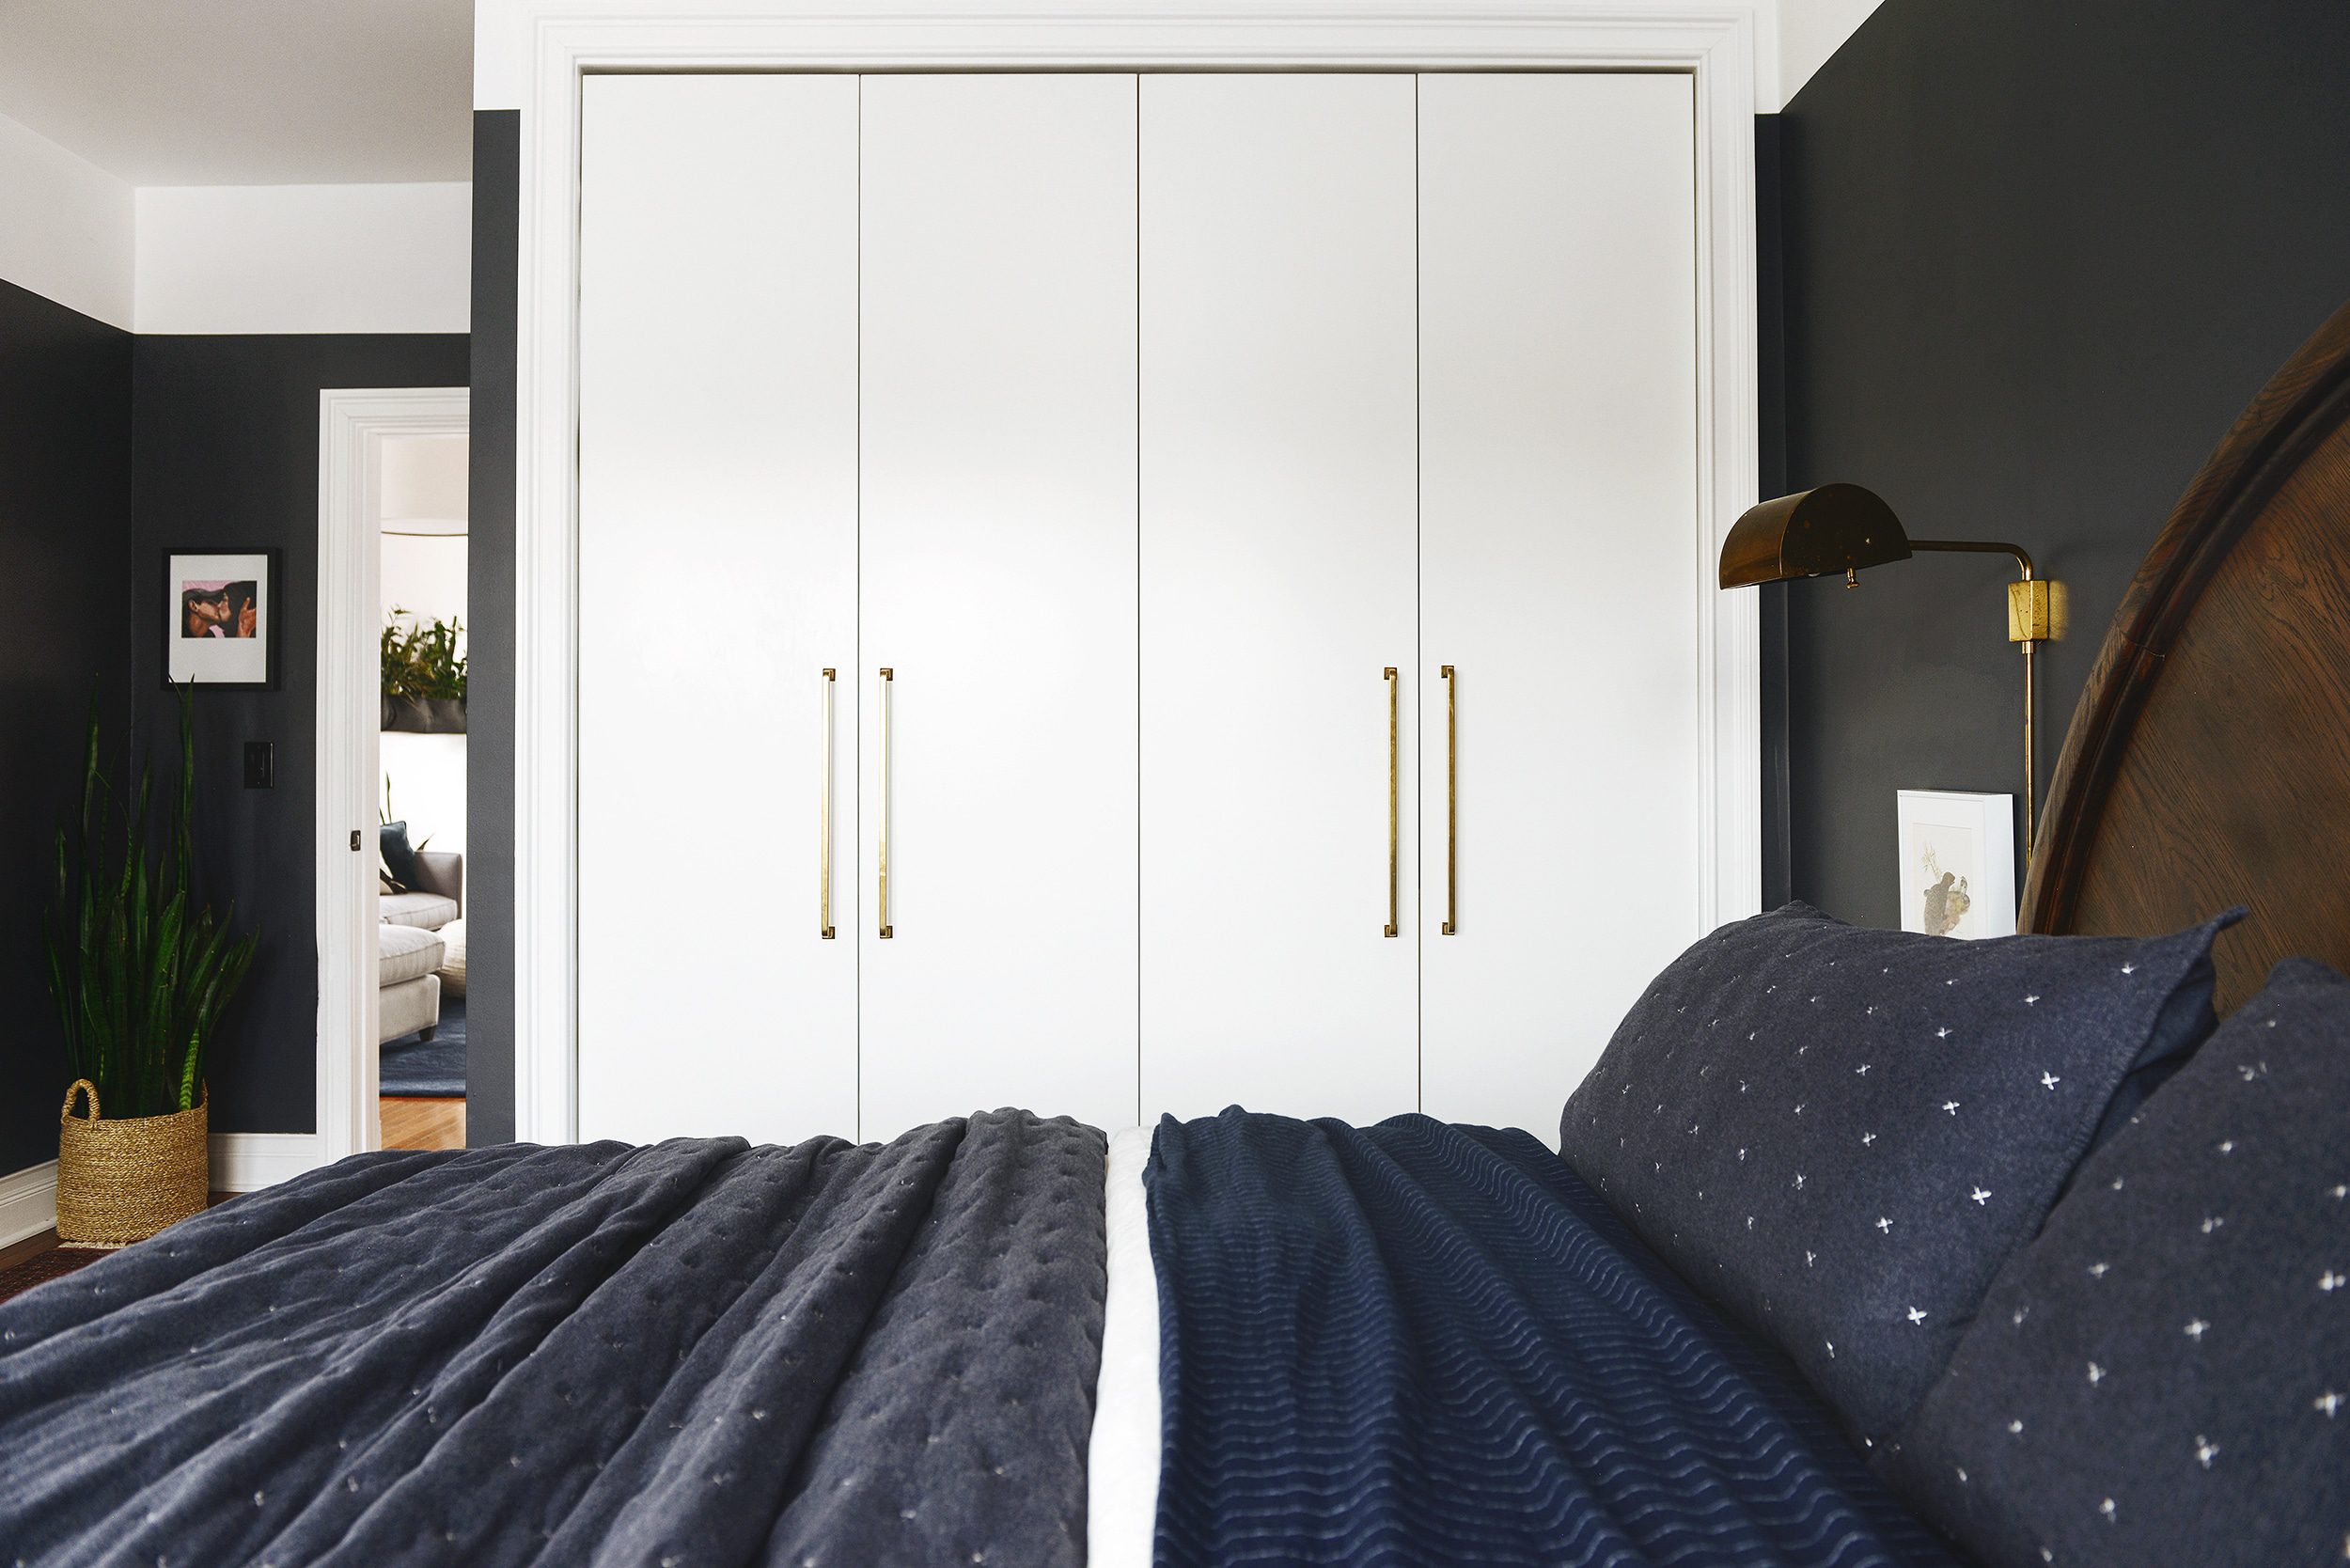 Floor to ceiling wardrobes built in using the IKEA PAX system | via Yellow Brick Home